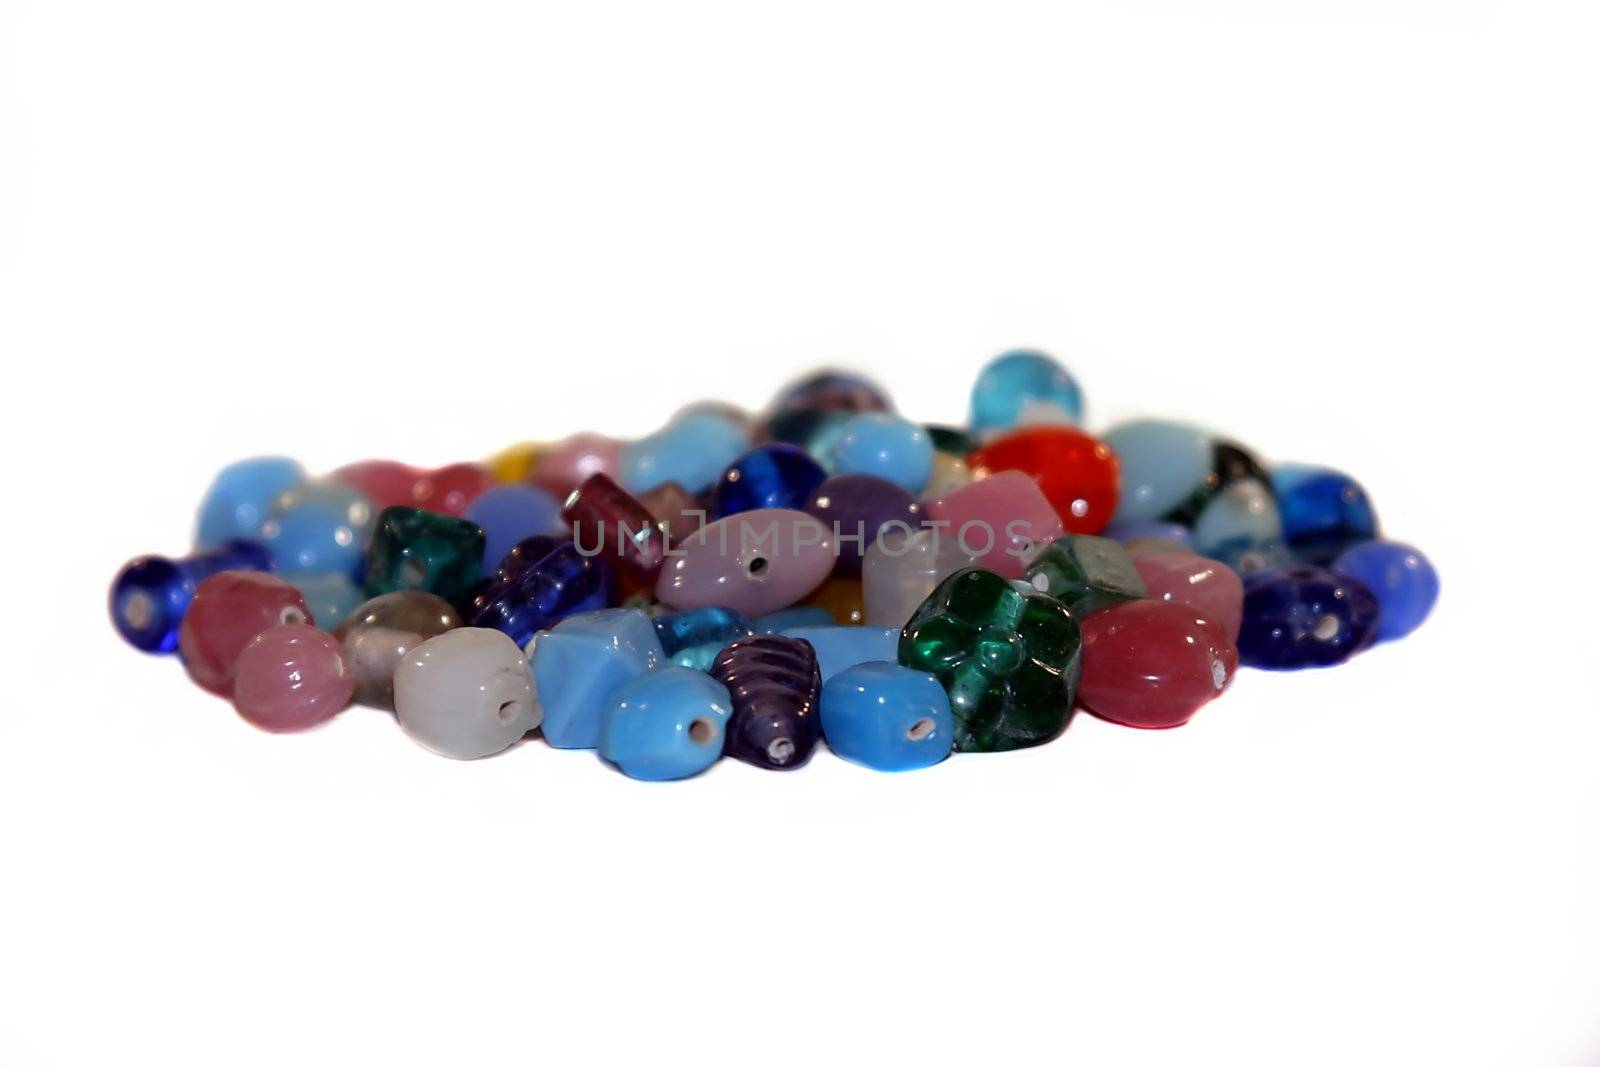 Colorful gemstones in a pile on white background.